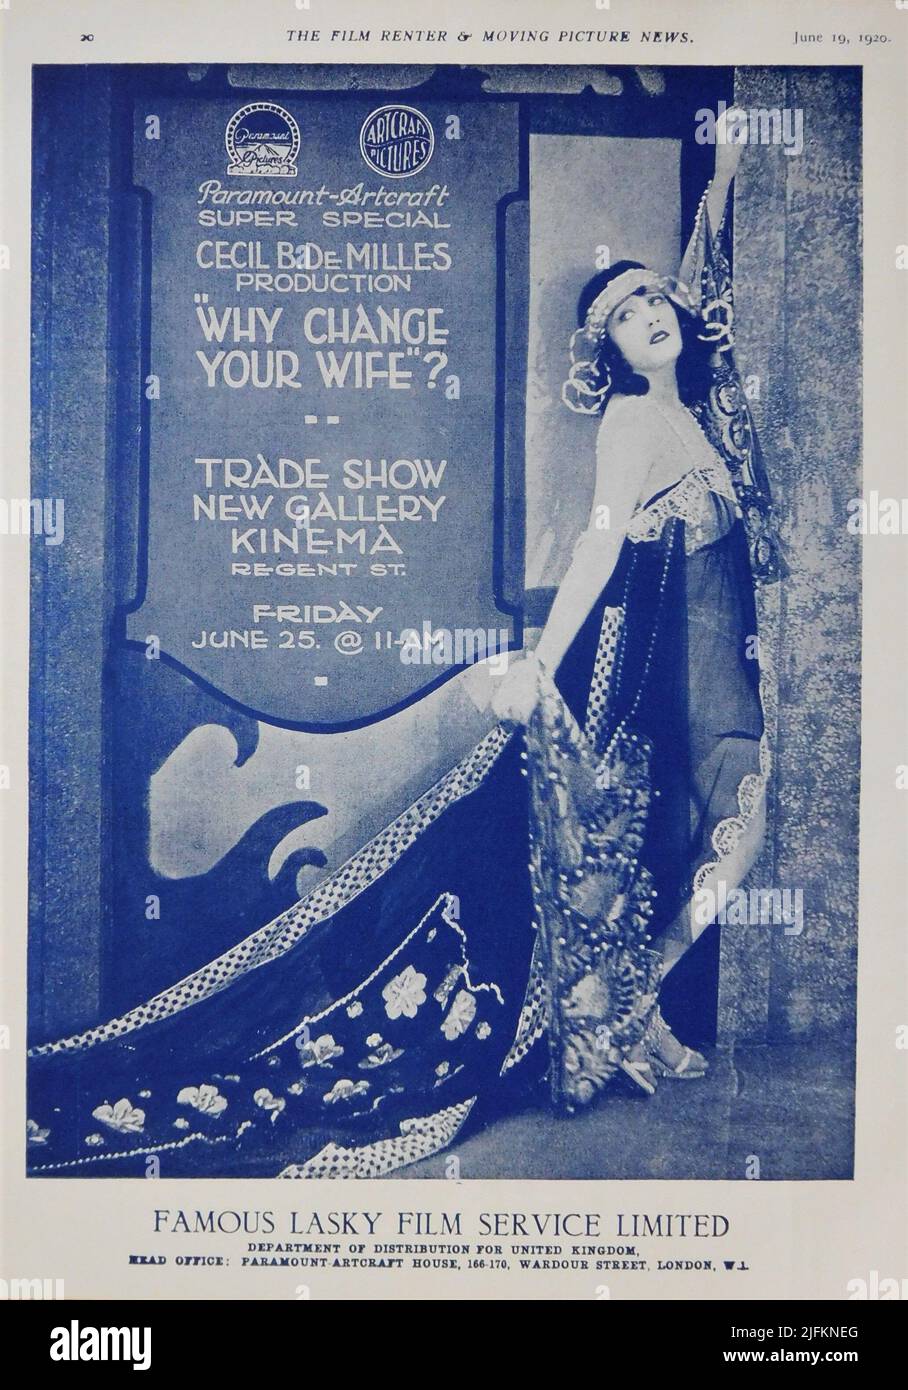 GLORIA SWANSON in WHY CHANGE YOUR WIFE ? 1920 director producer CECIL B. DeMILLE story William C. de Mille costume design Natacha Rambova and Clare West Famous Players- Lasky Corporation / Paramount Pictures Stock Photo